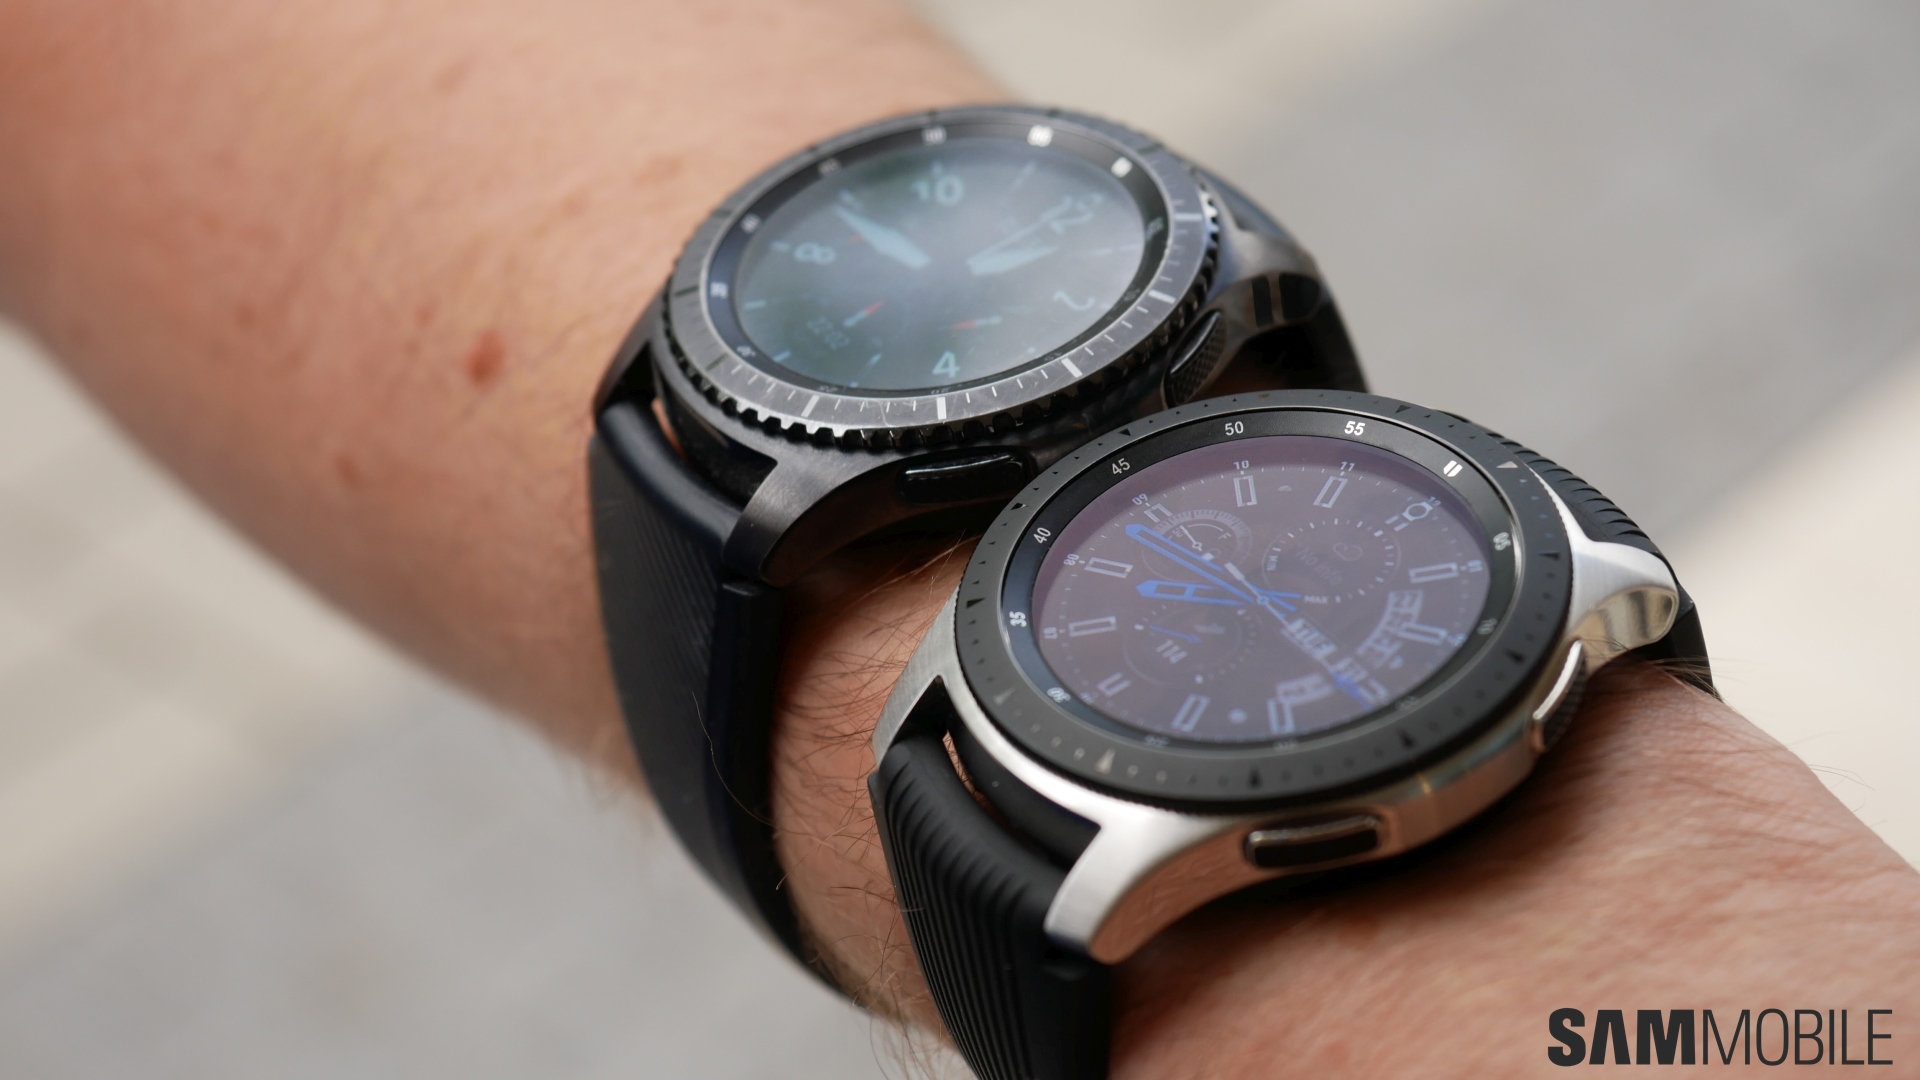 Samsung Galaxy Watch vs Gear S3 in pictures  SamMobile